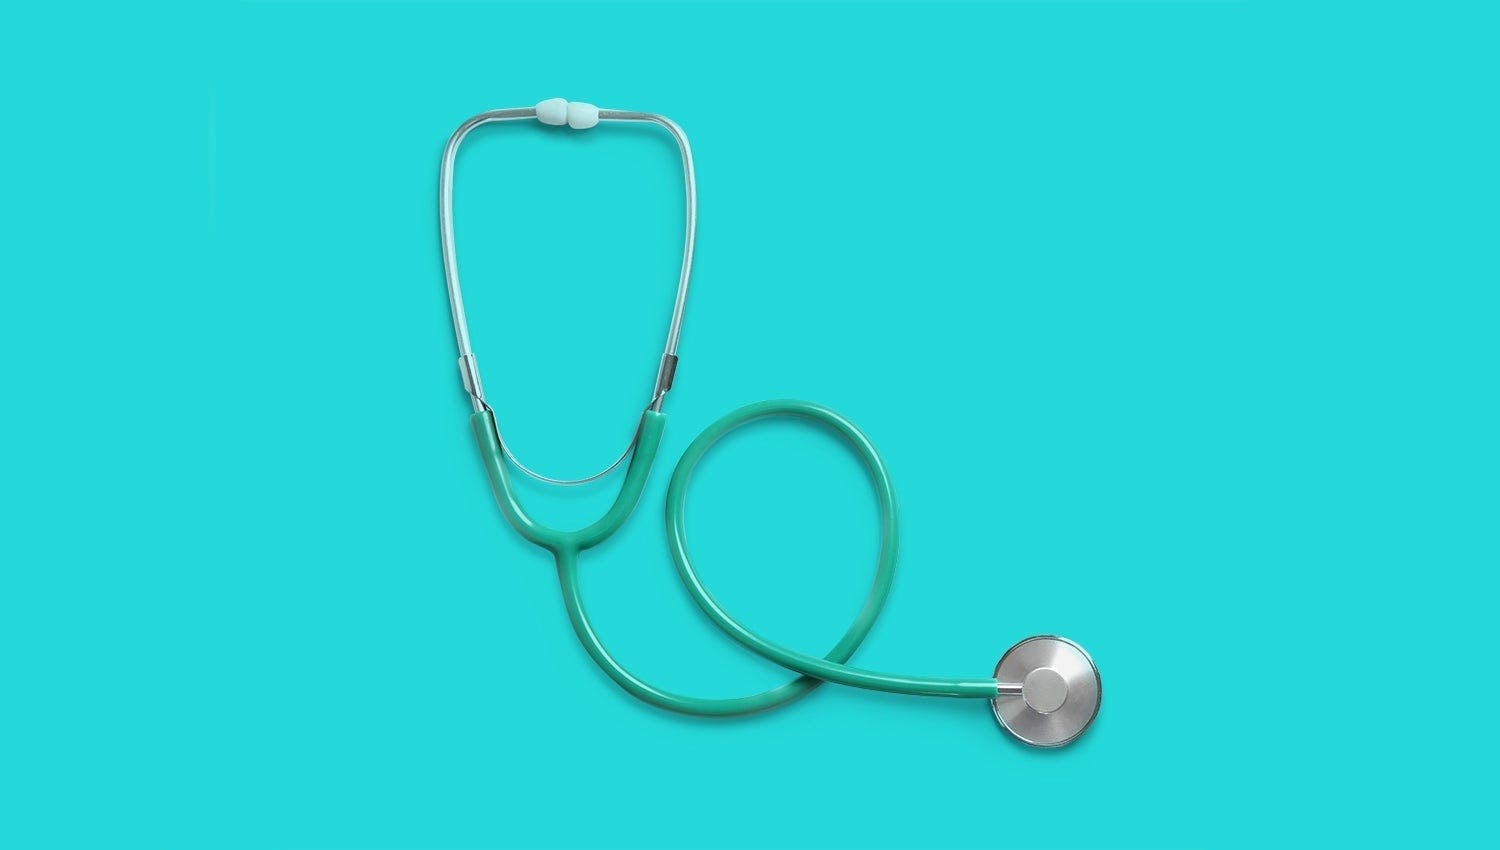 A stethoscope representing the traditional healthcare system which is becoming harder to access, making AI solutions needed.